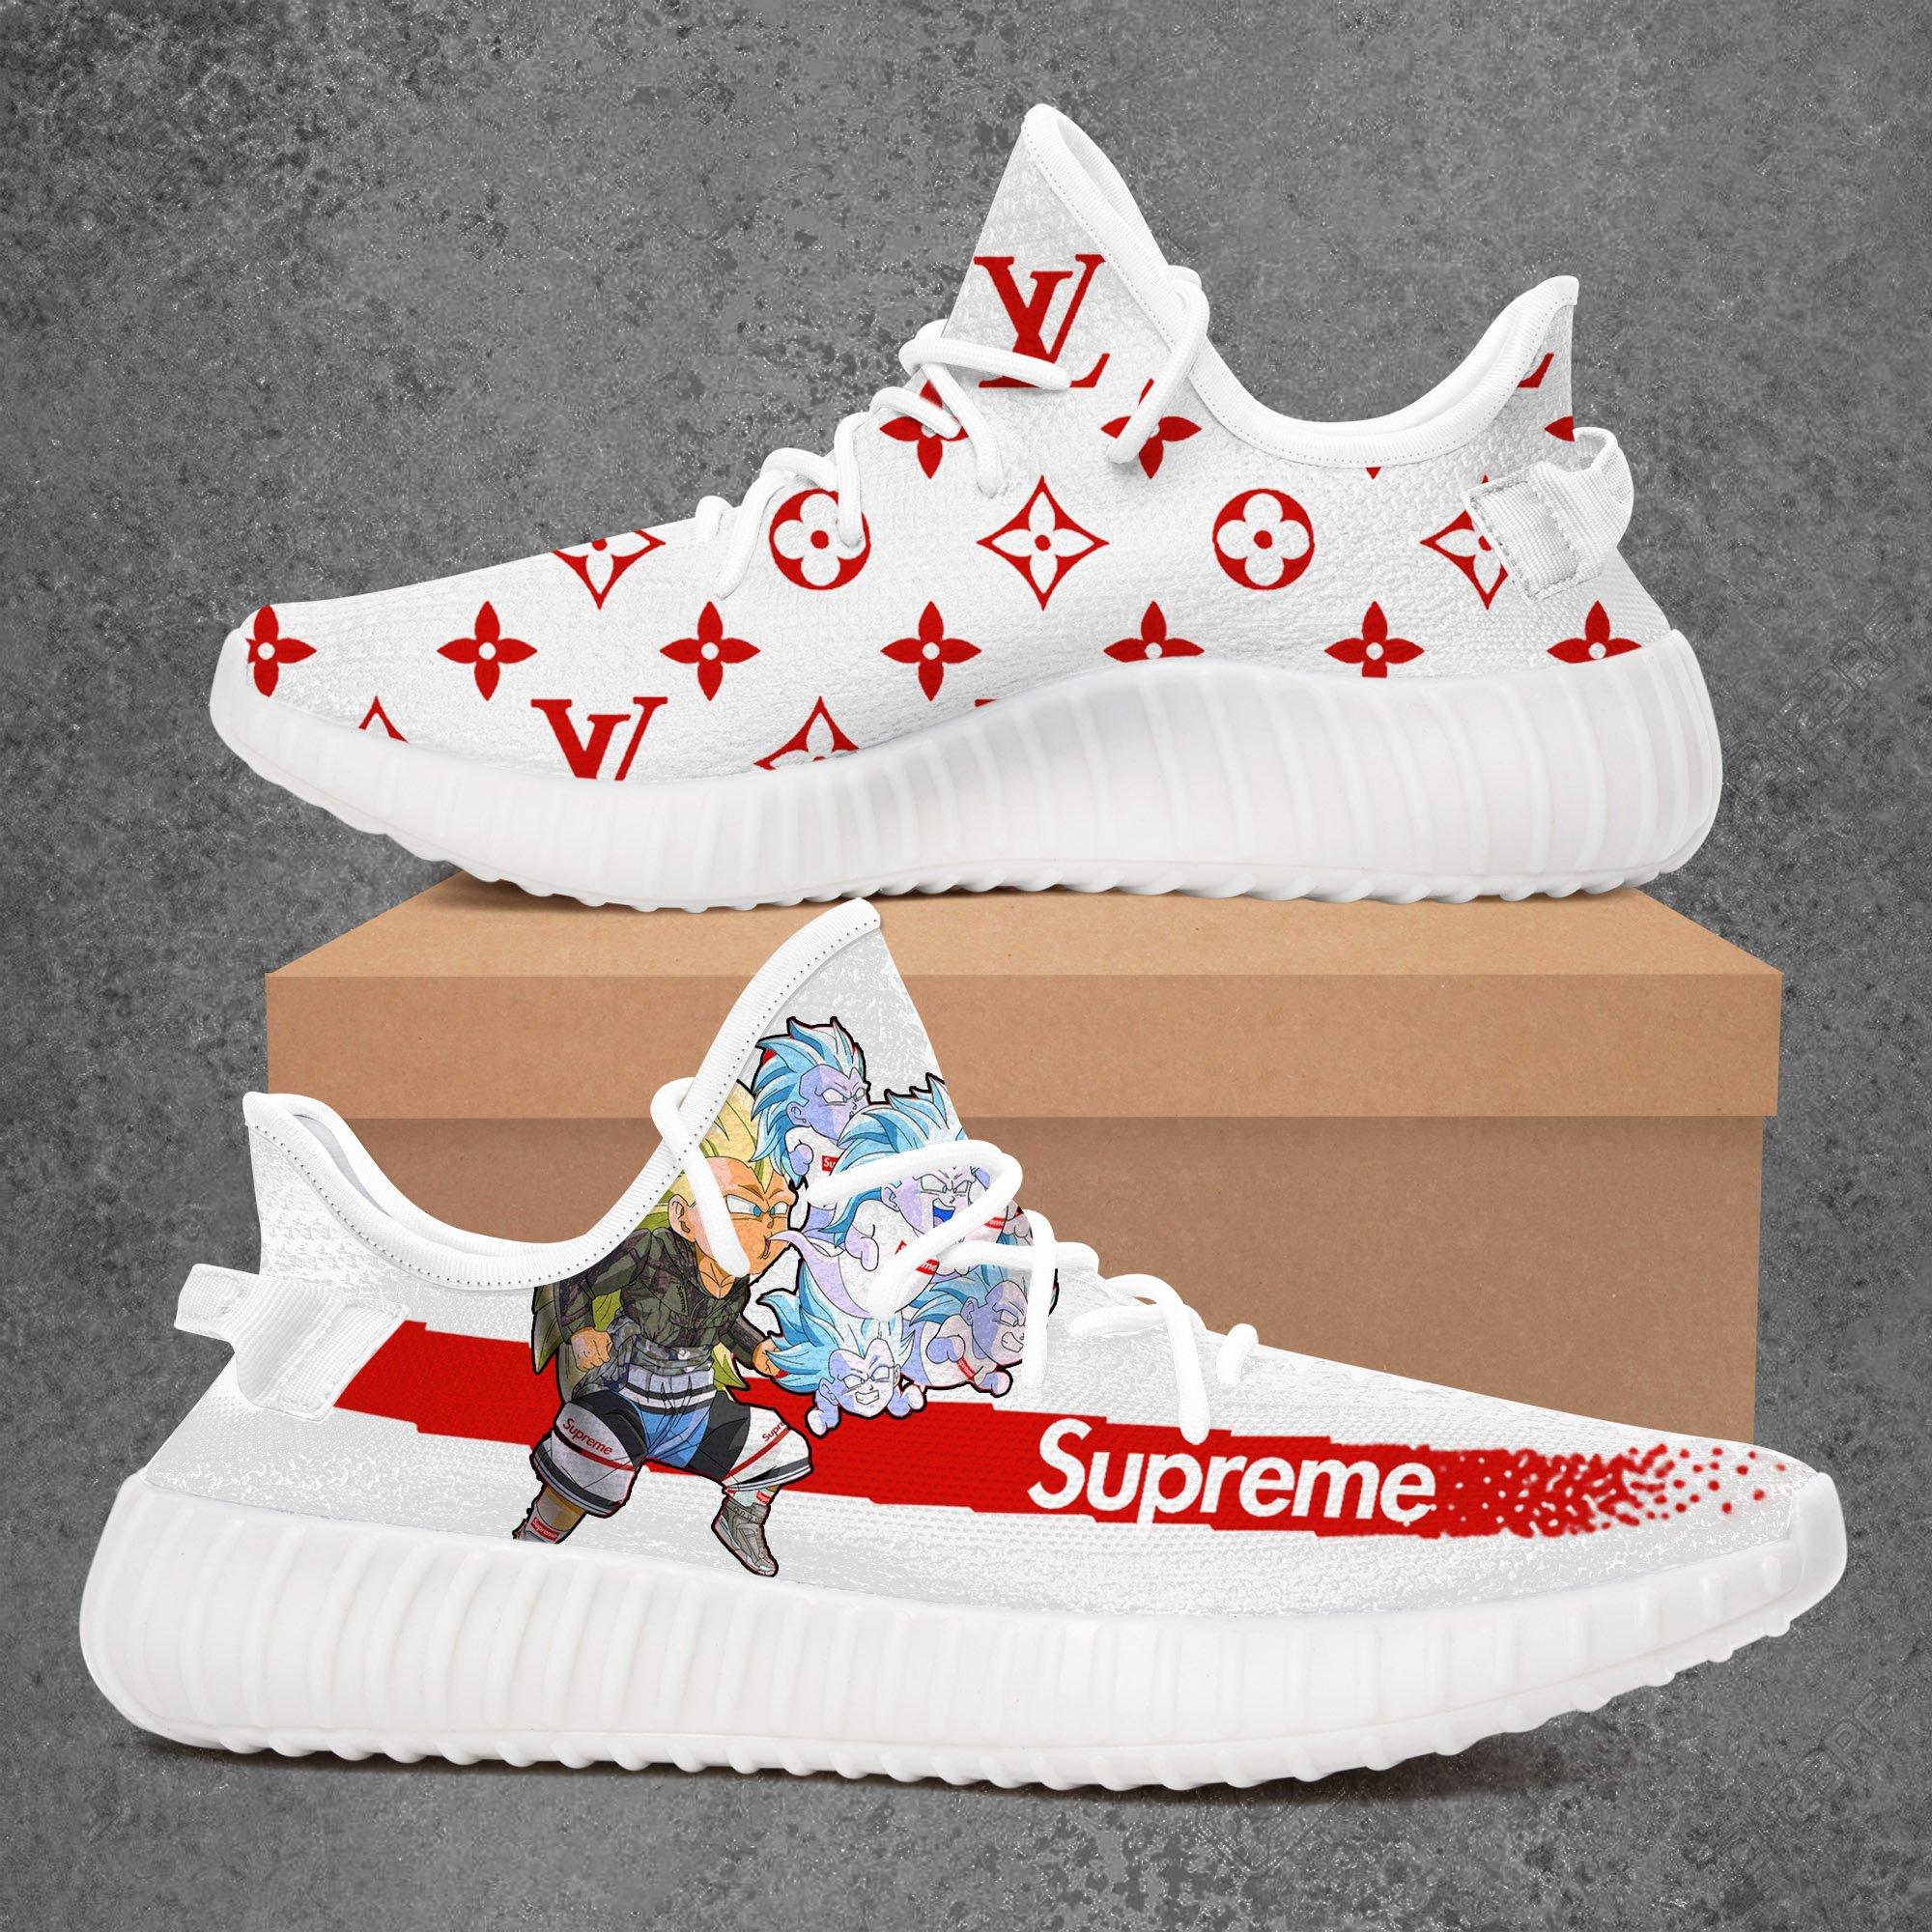 Dragon Ball Sup Ice Supreme Louis Vuitton Yeezy Boost 350 v2 Top Branding Trends 2019 - BRYDGET